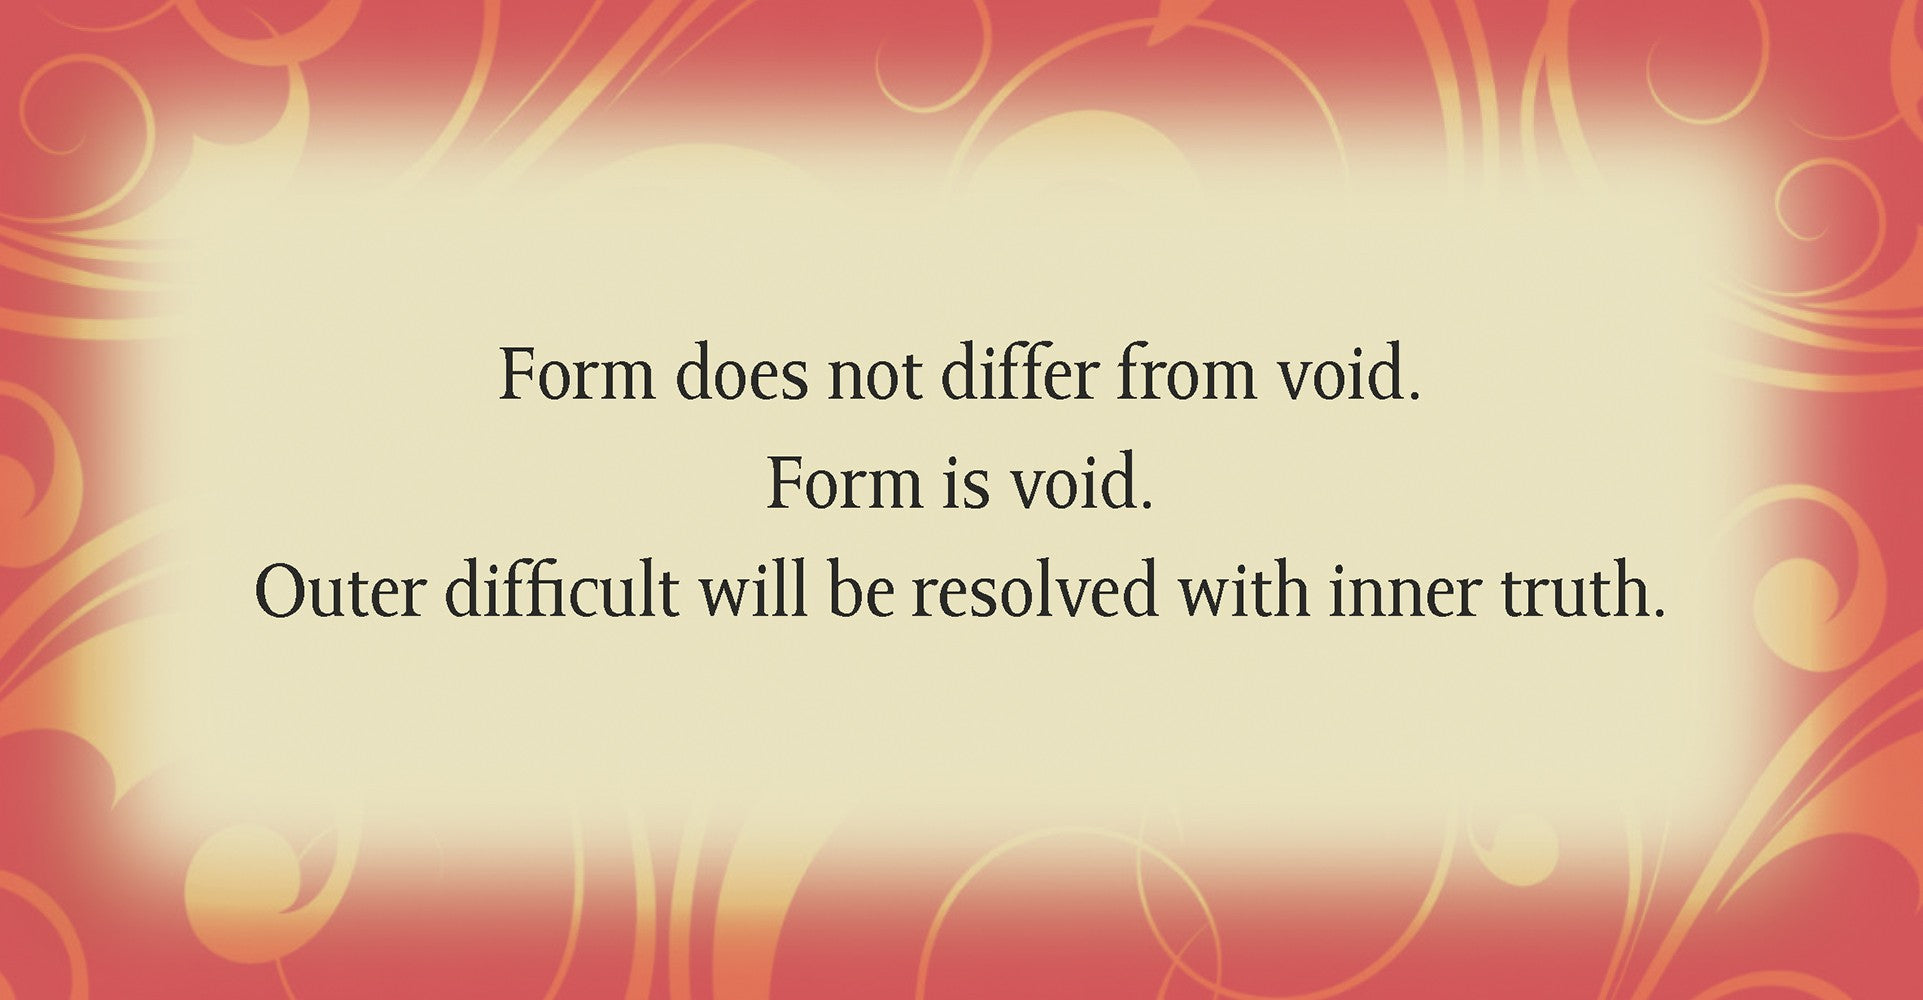 Form is Void card